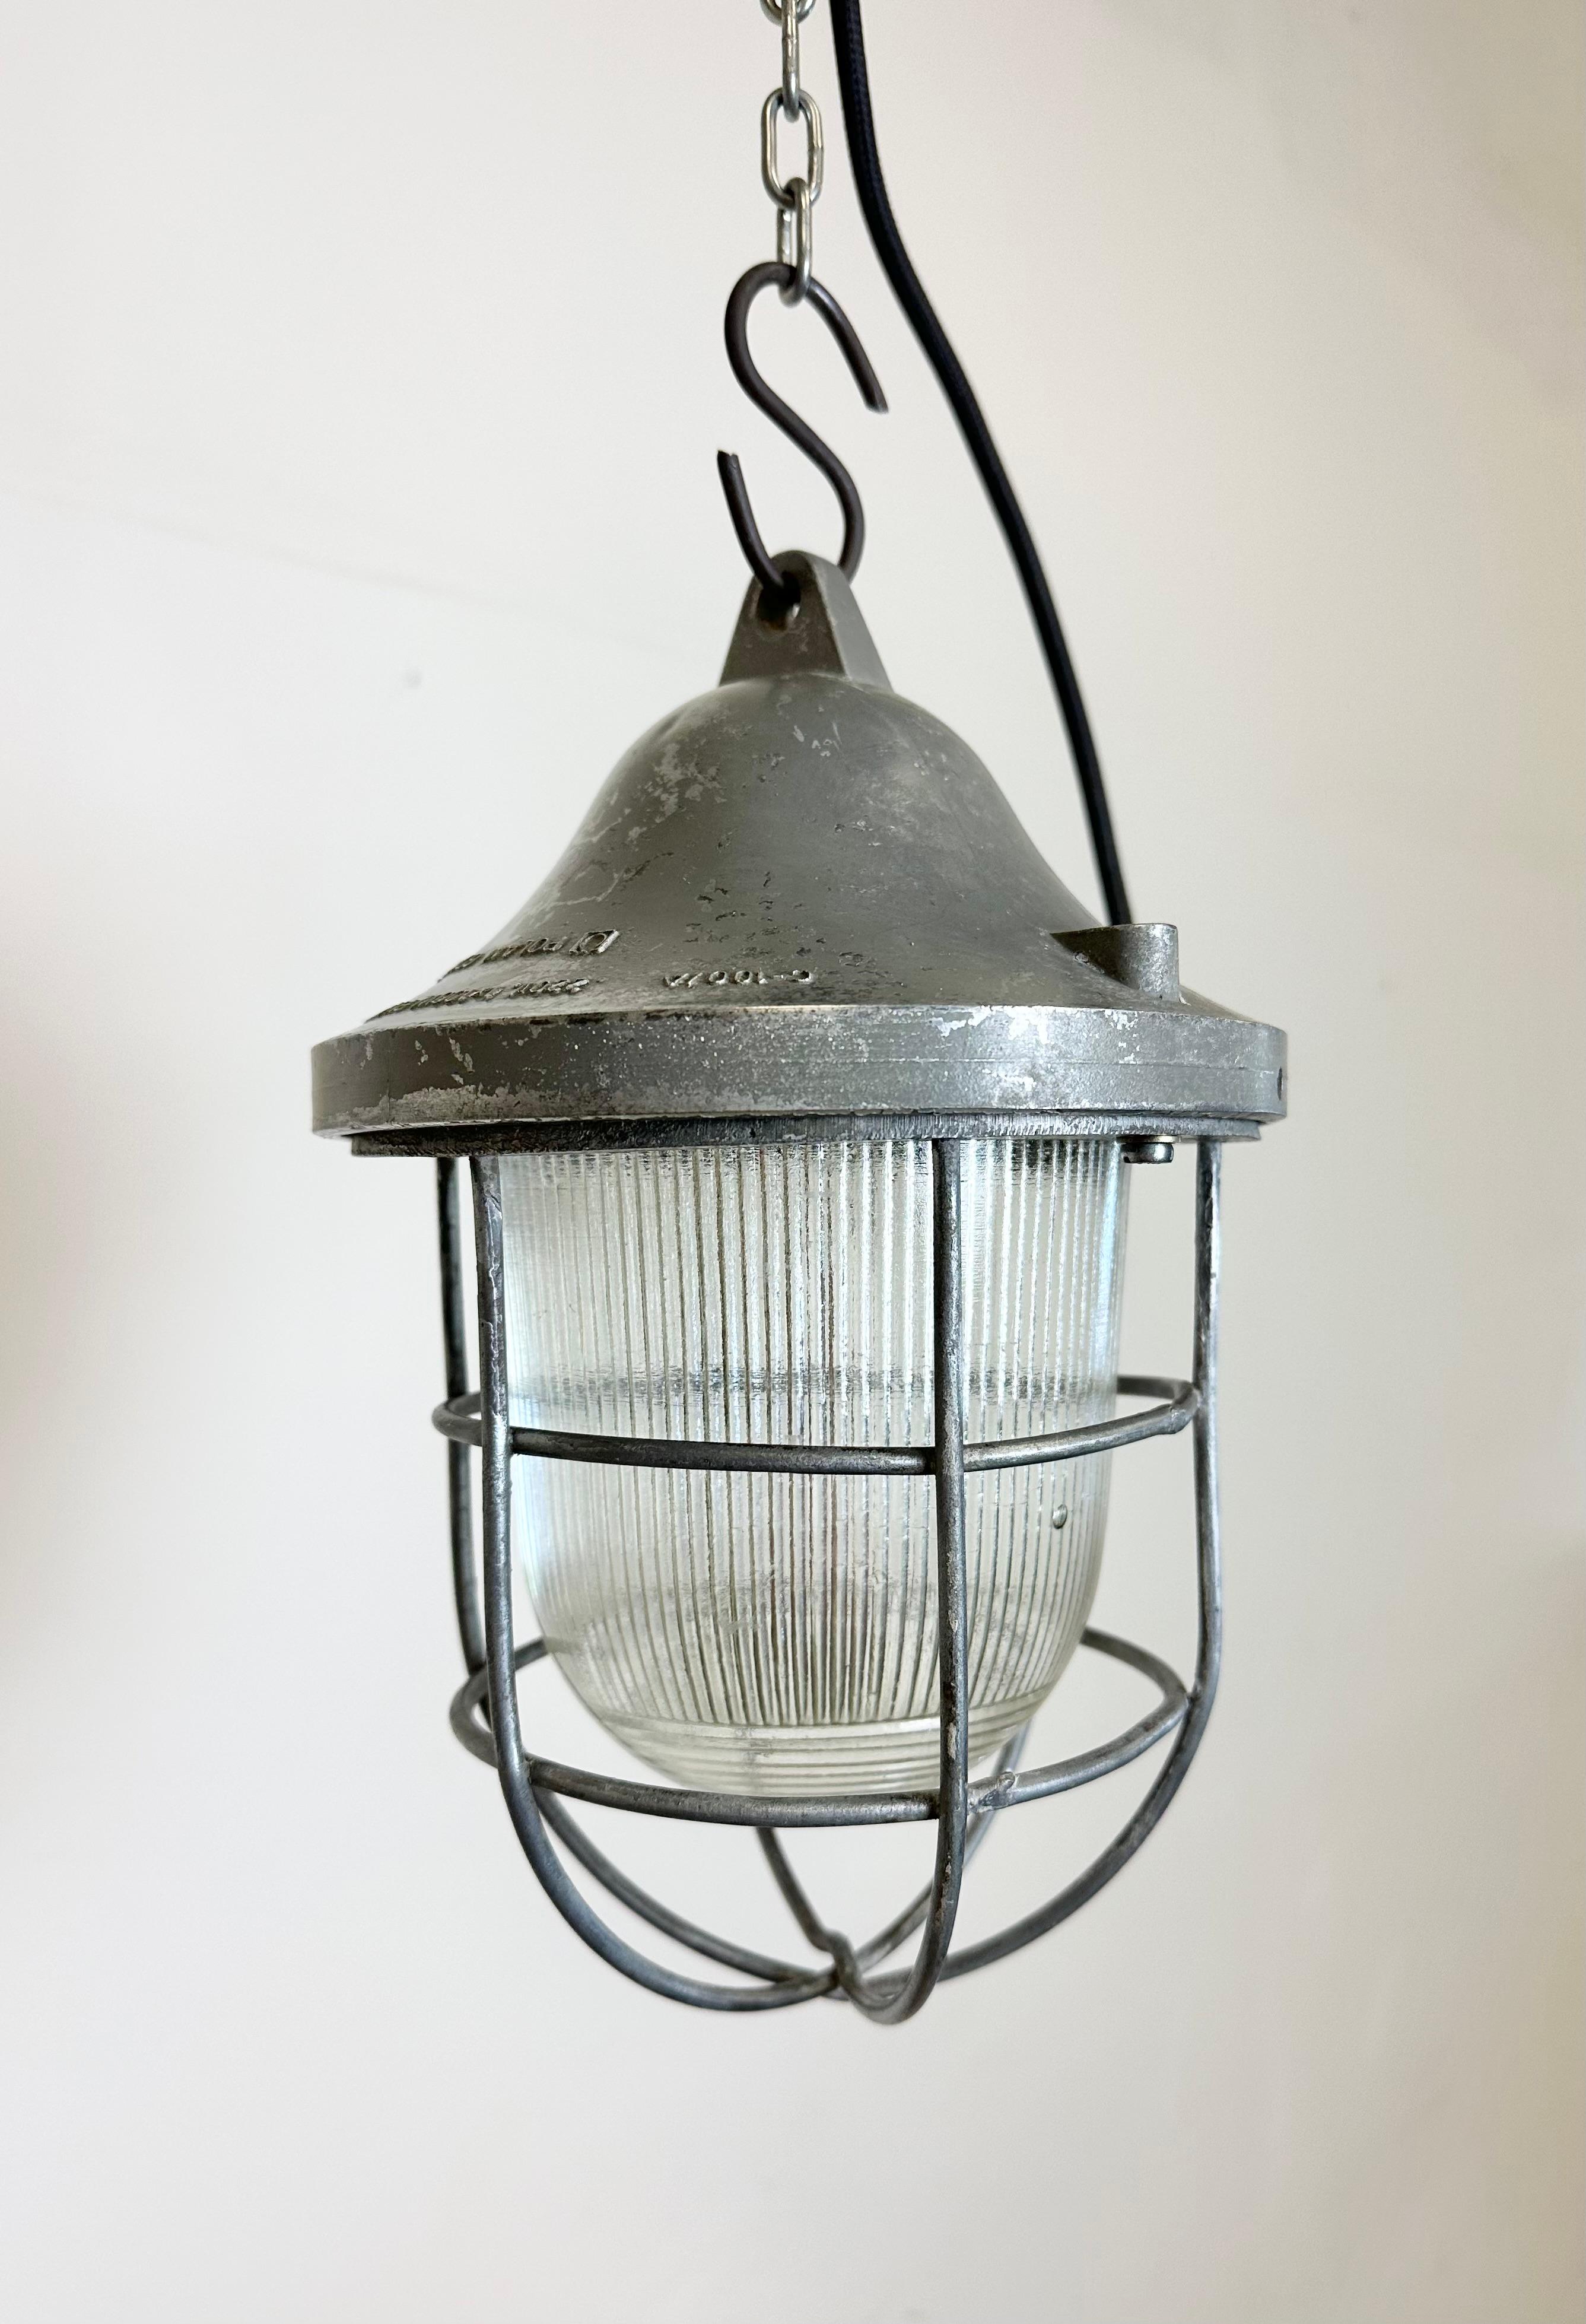 Grey Industrial Bunker Cage Light from Polam Gdansk, 1970s In Good Condition For Sale In Kojetice, CZ